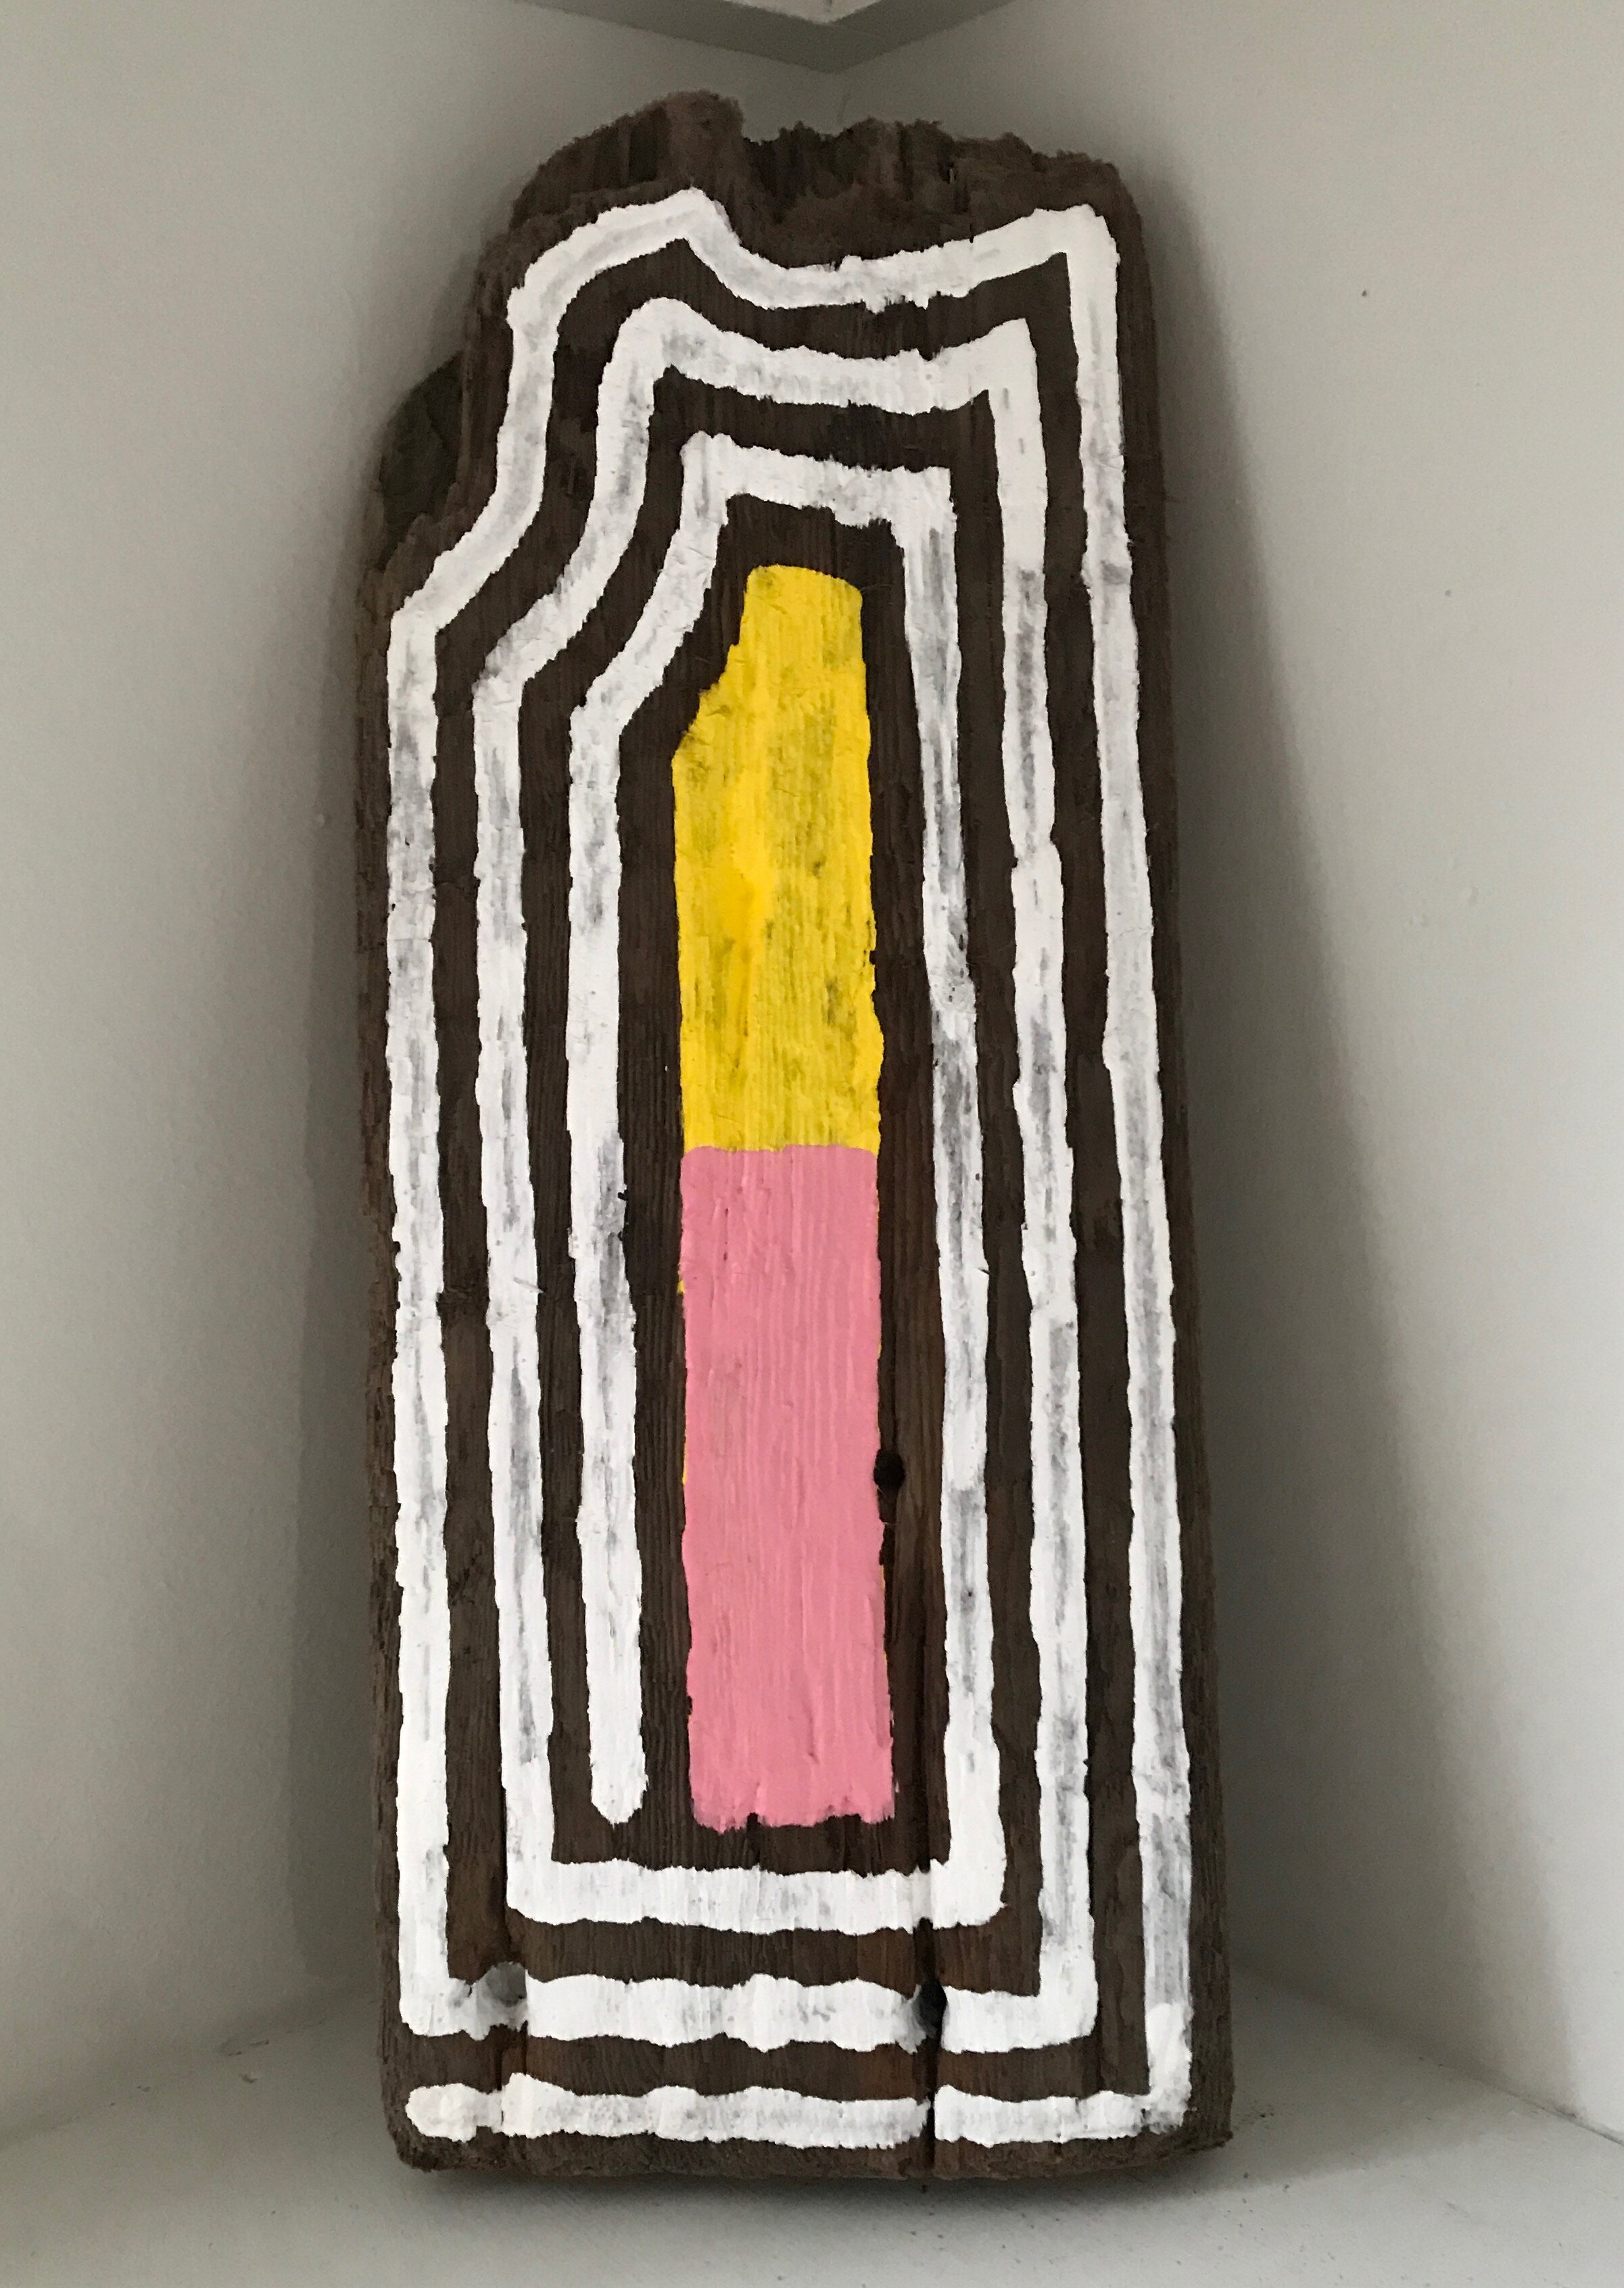 Untitled (frequency and balance), 2020, acrylic on found wood from Rockaway Beach, 14 x 5.5 x 2.5 inches (Copy)